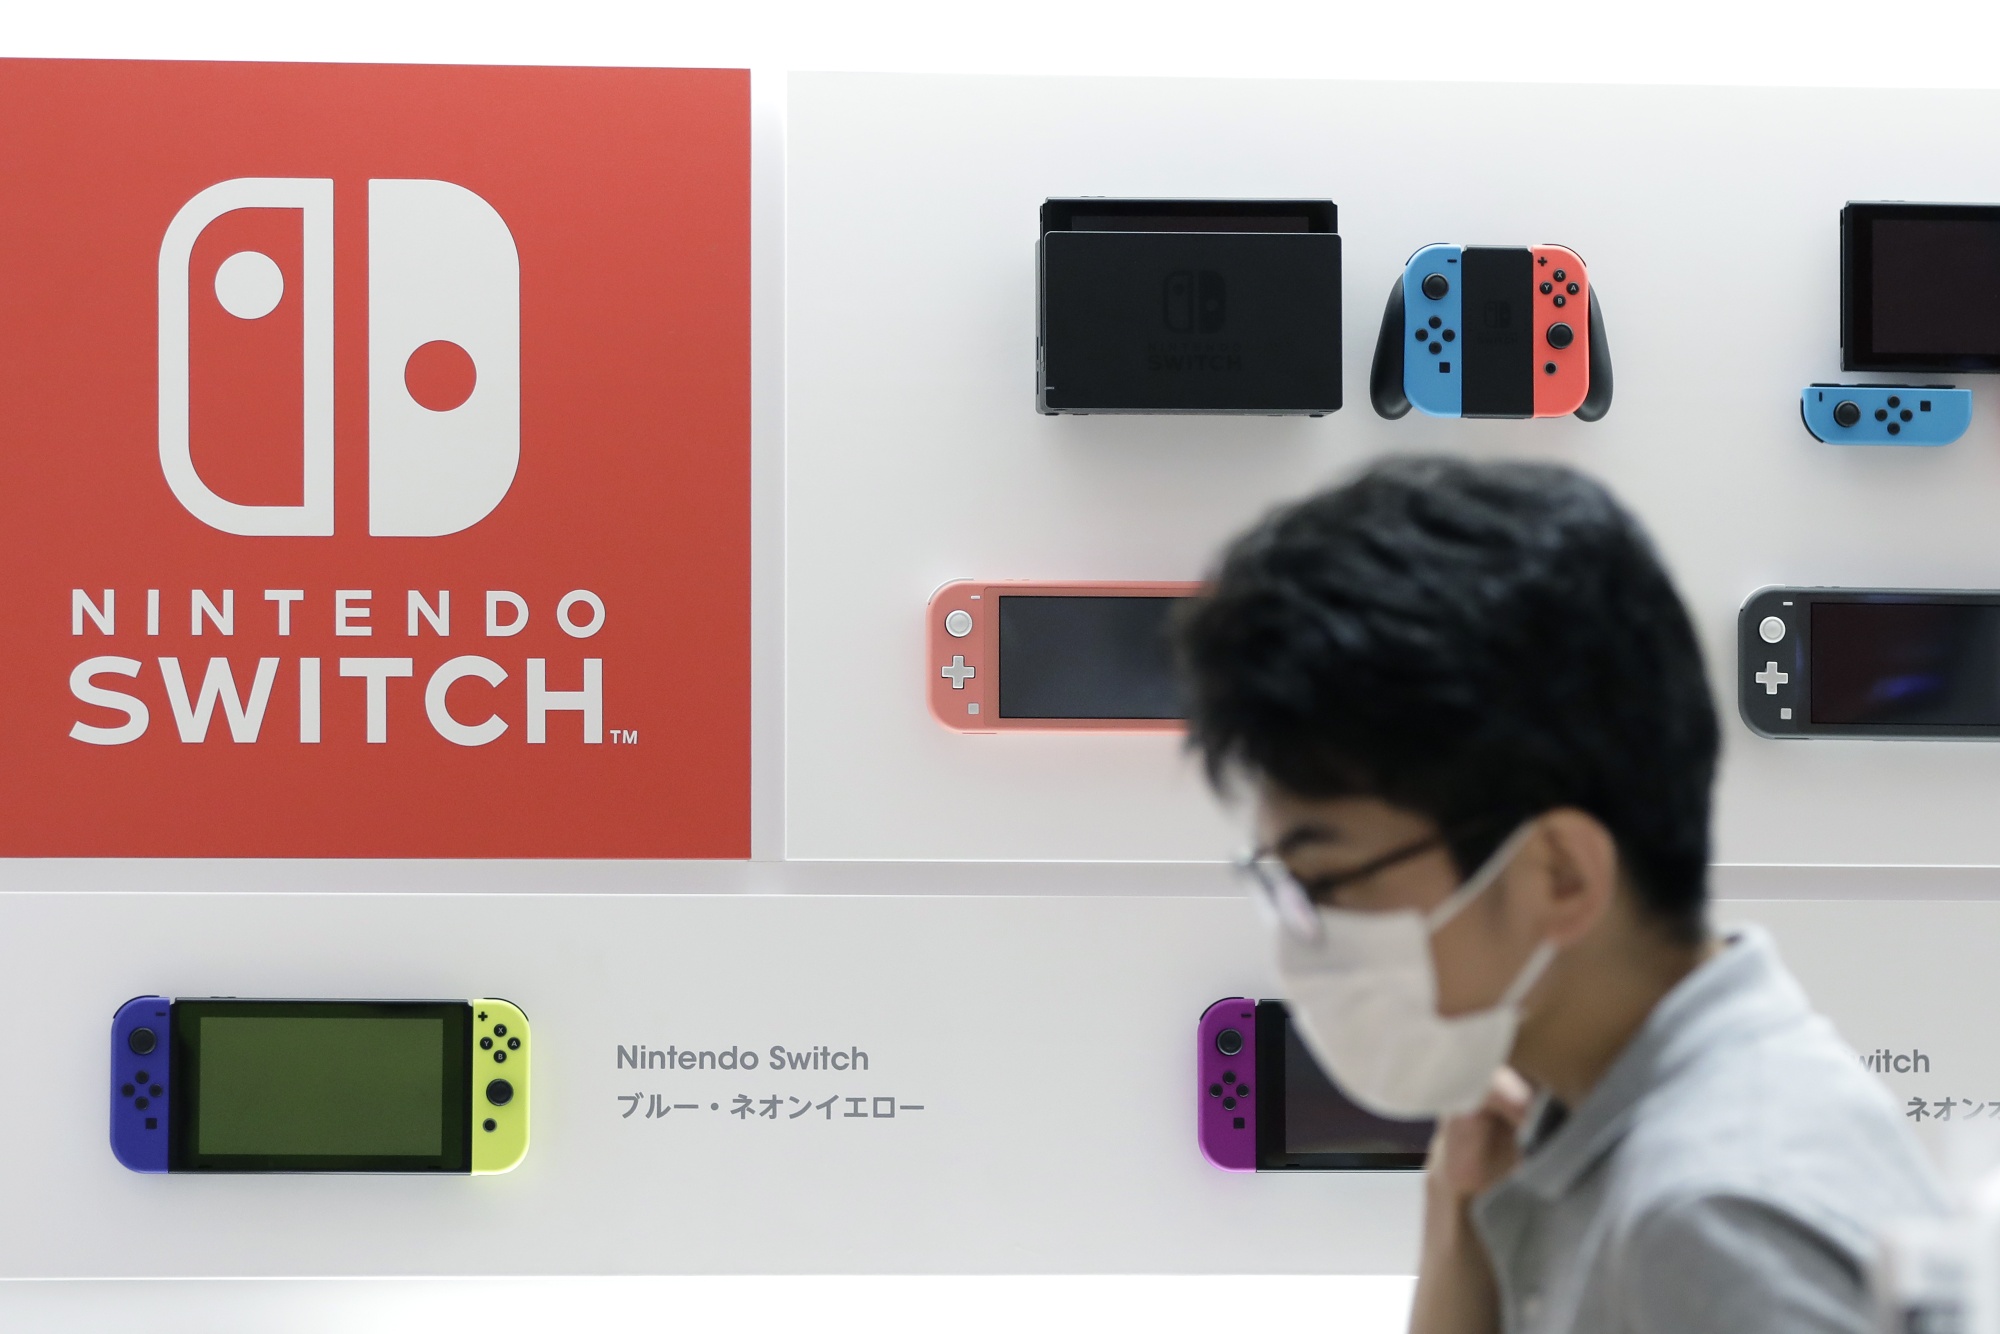 Nintendo Switch price isn't going up, despite higher costs: president -  Nikkei Asia